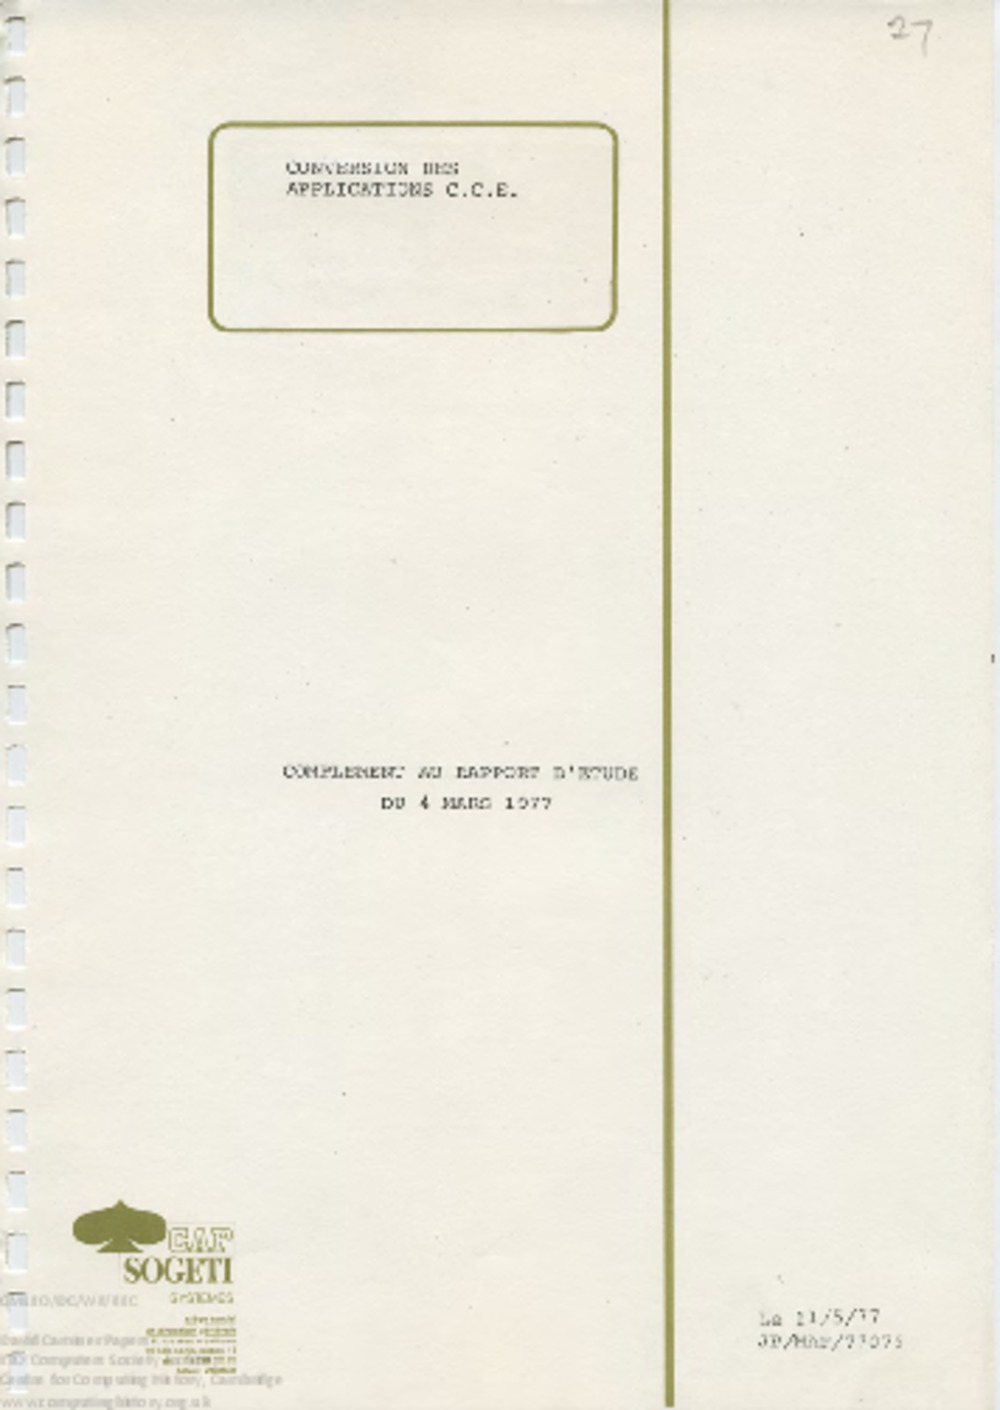 Article: 58510 Conversion des Applications CCE (11 May 1977) 